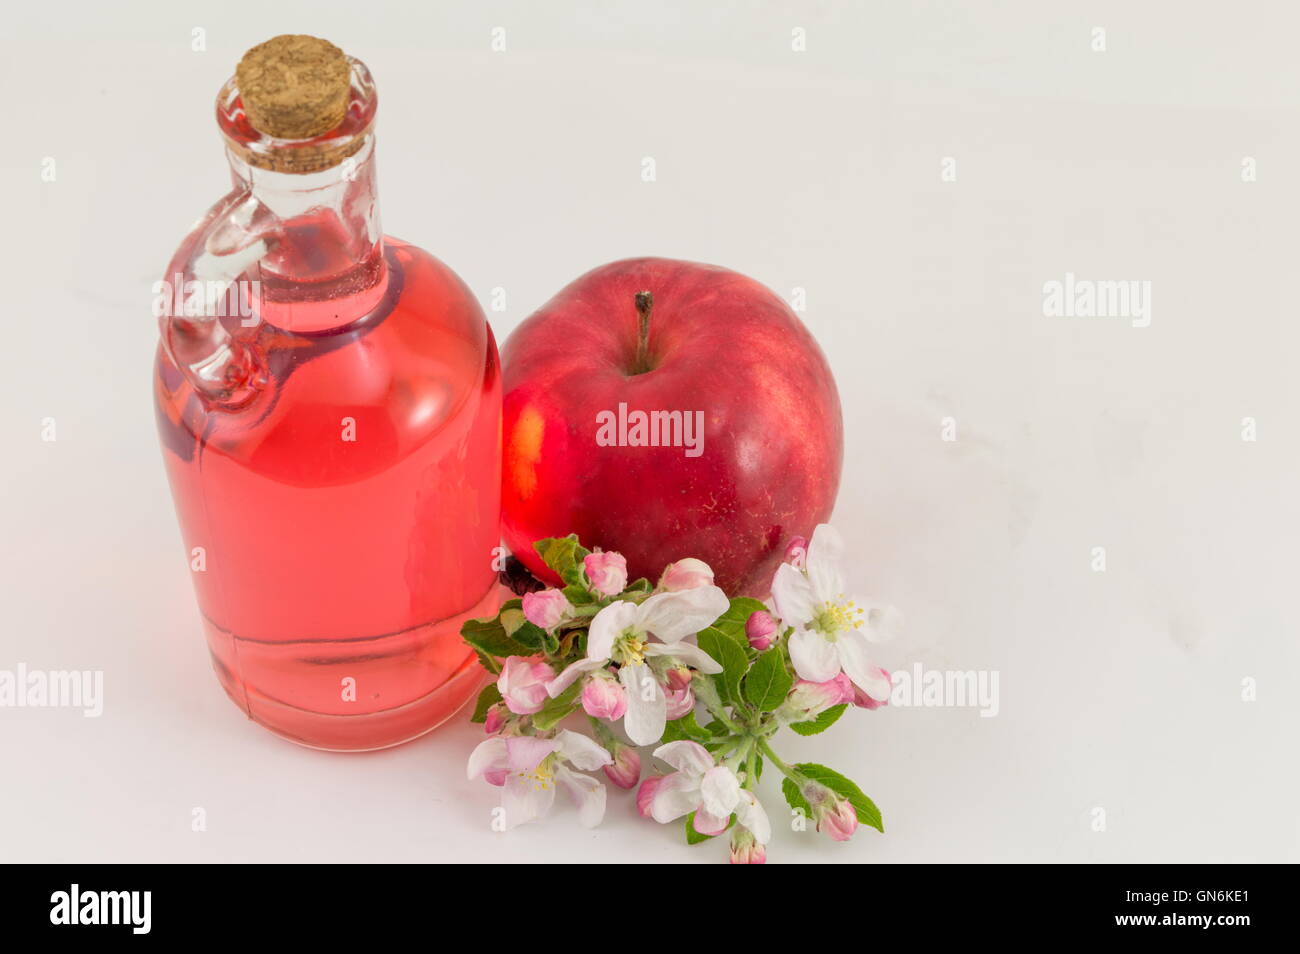 Red apple and apple vinegar decorated with flowers Stock Photo